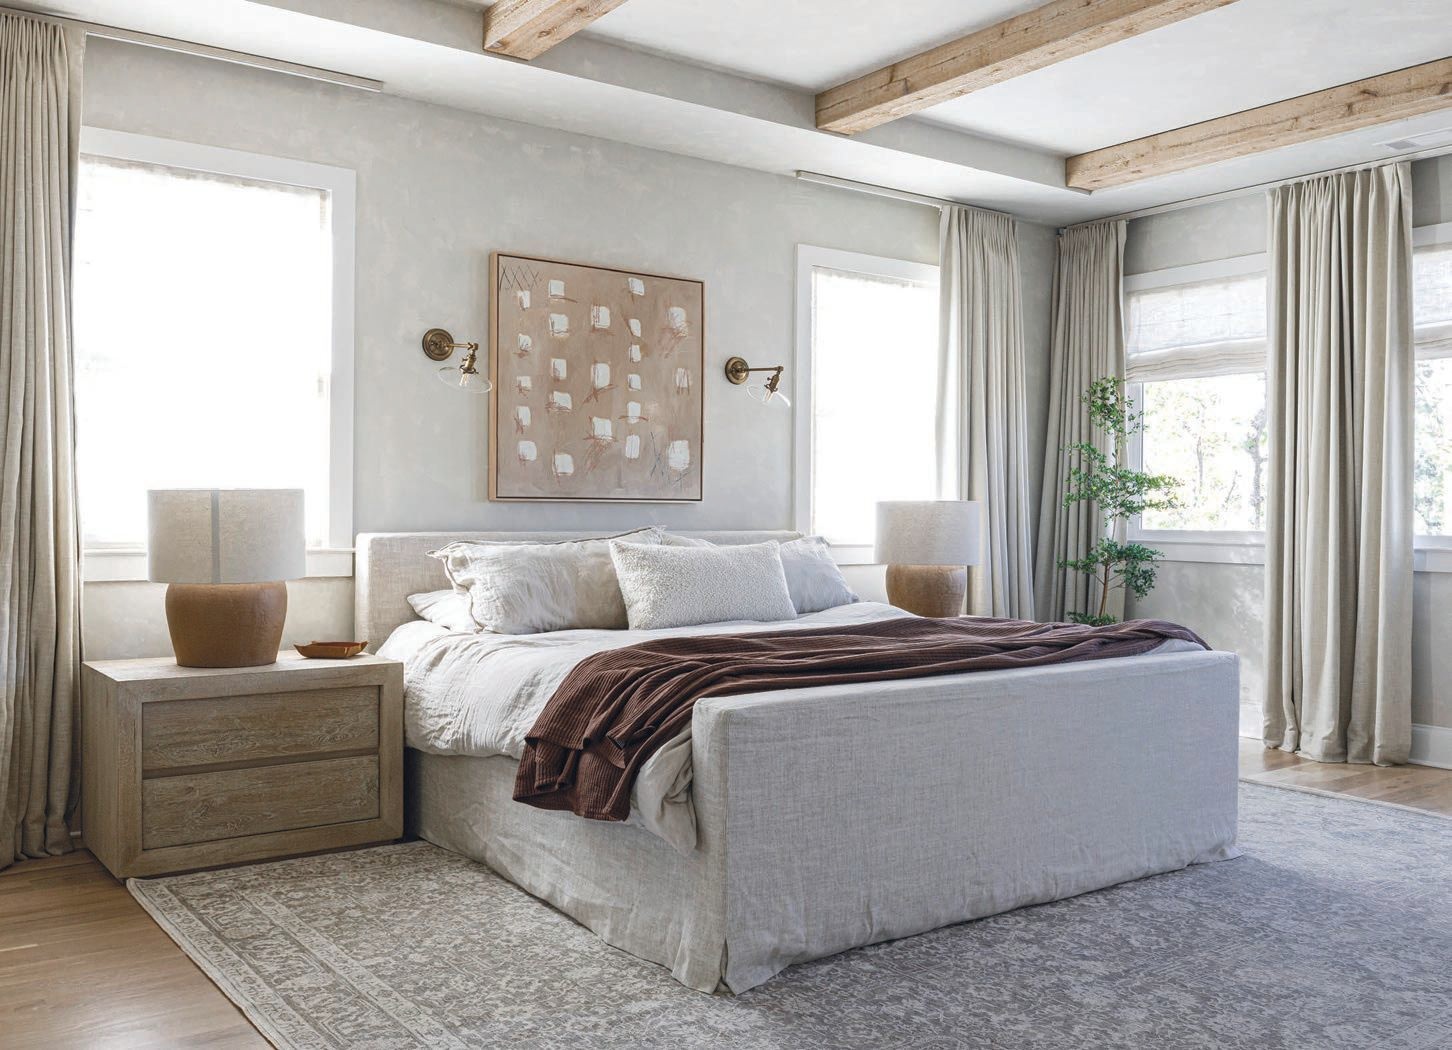 The primary bedroom features Jim Davis Designs window treatments (as does the rest of the home) paired with a neutral, textured paint by Portola Paints Photographed by Samantha Wittman